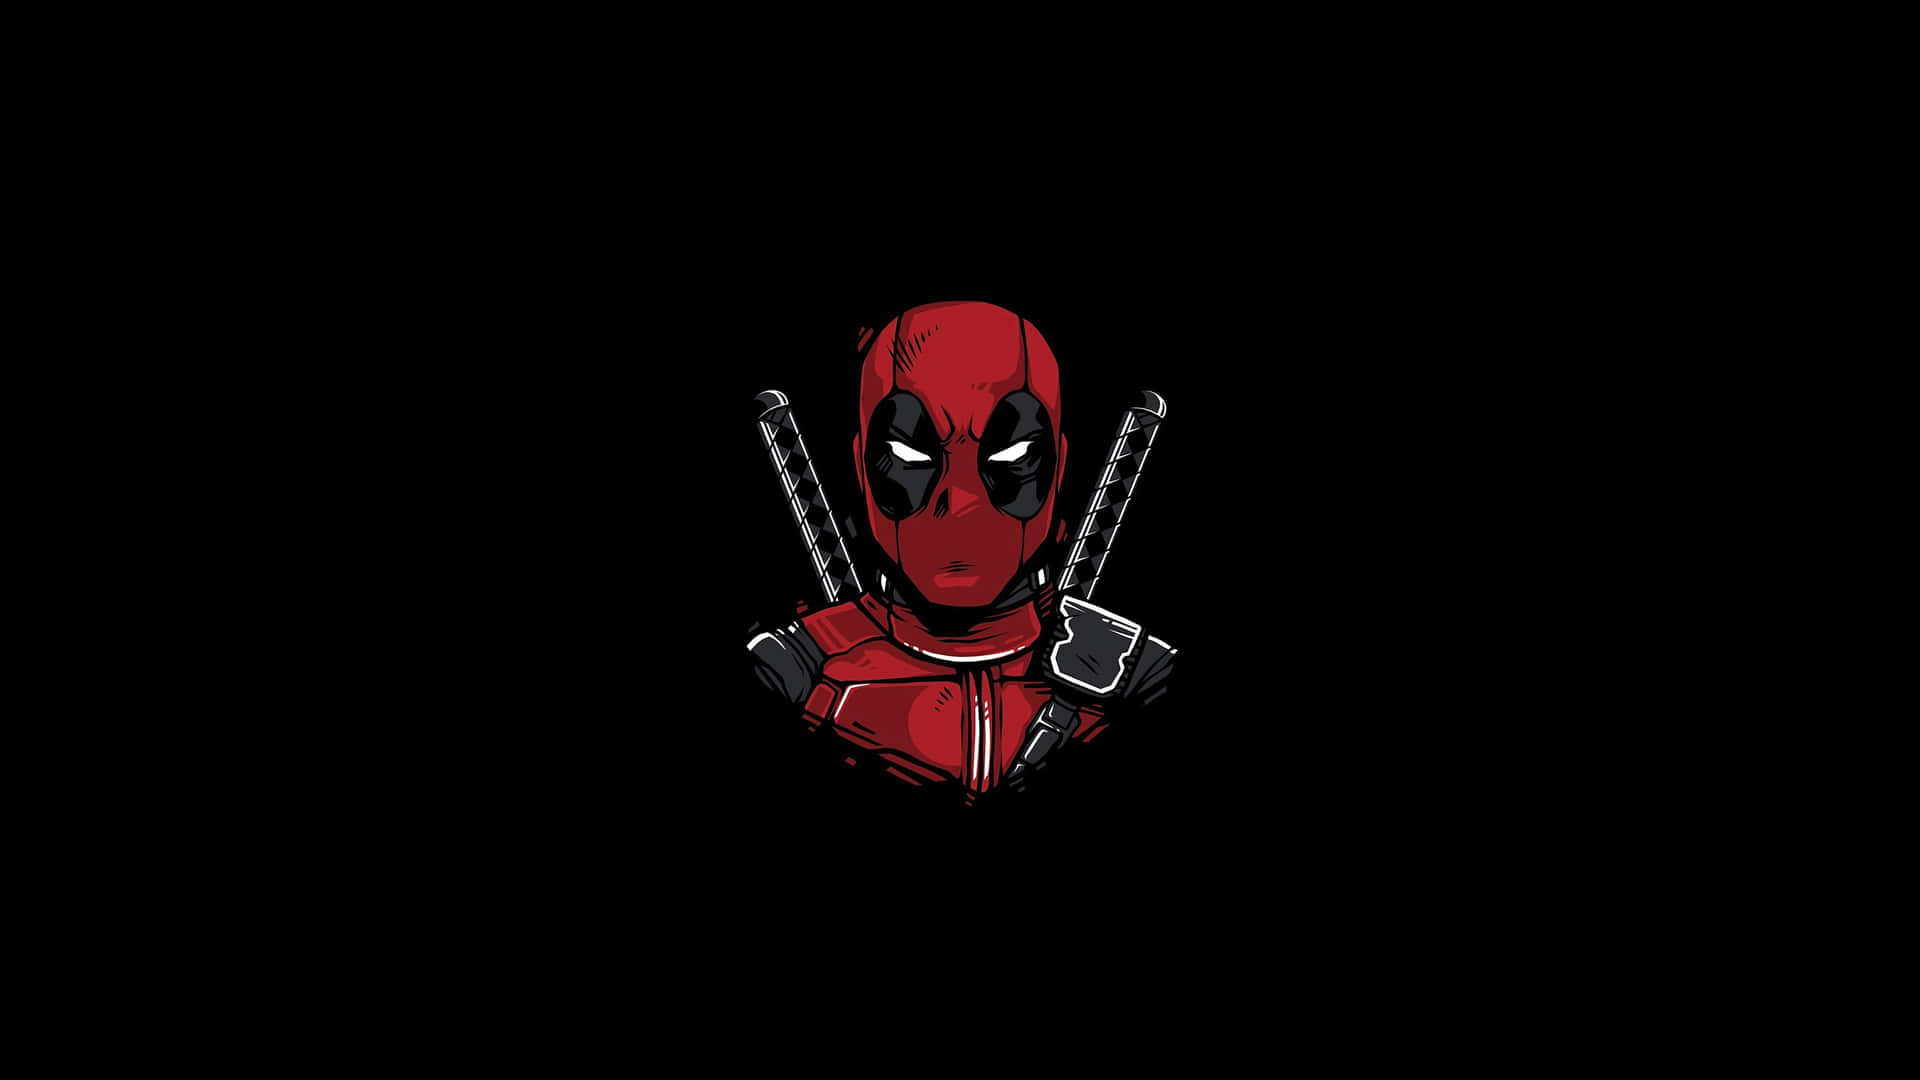 "Be yourself – even if that's a black Deadpool" Wallpaper